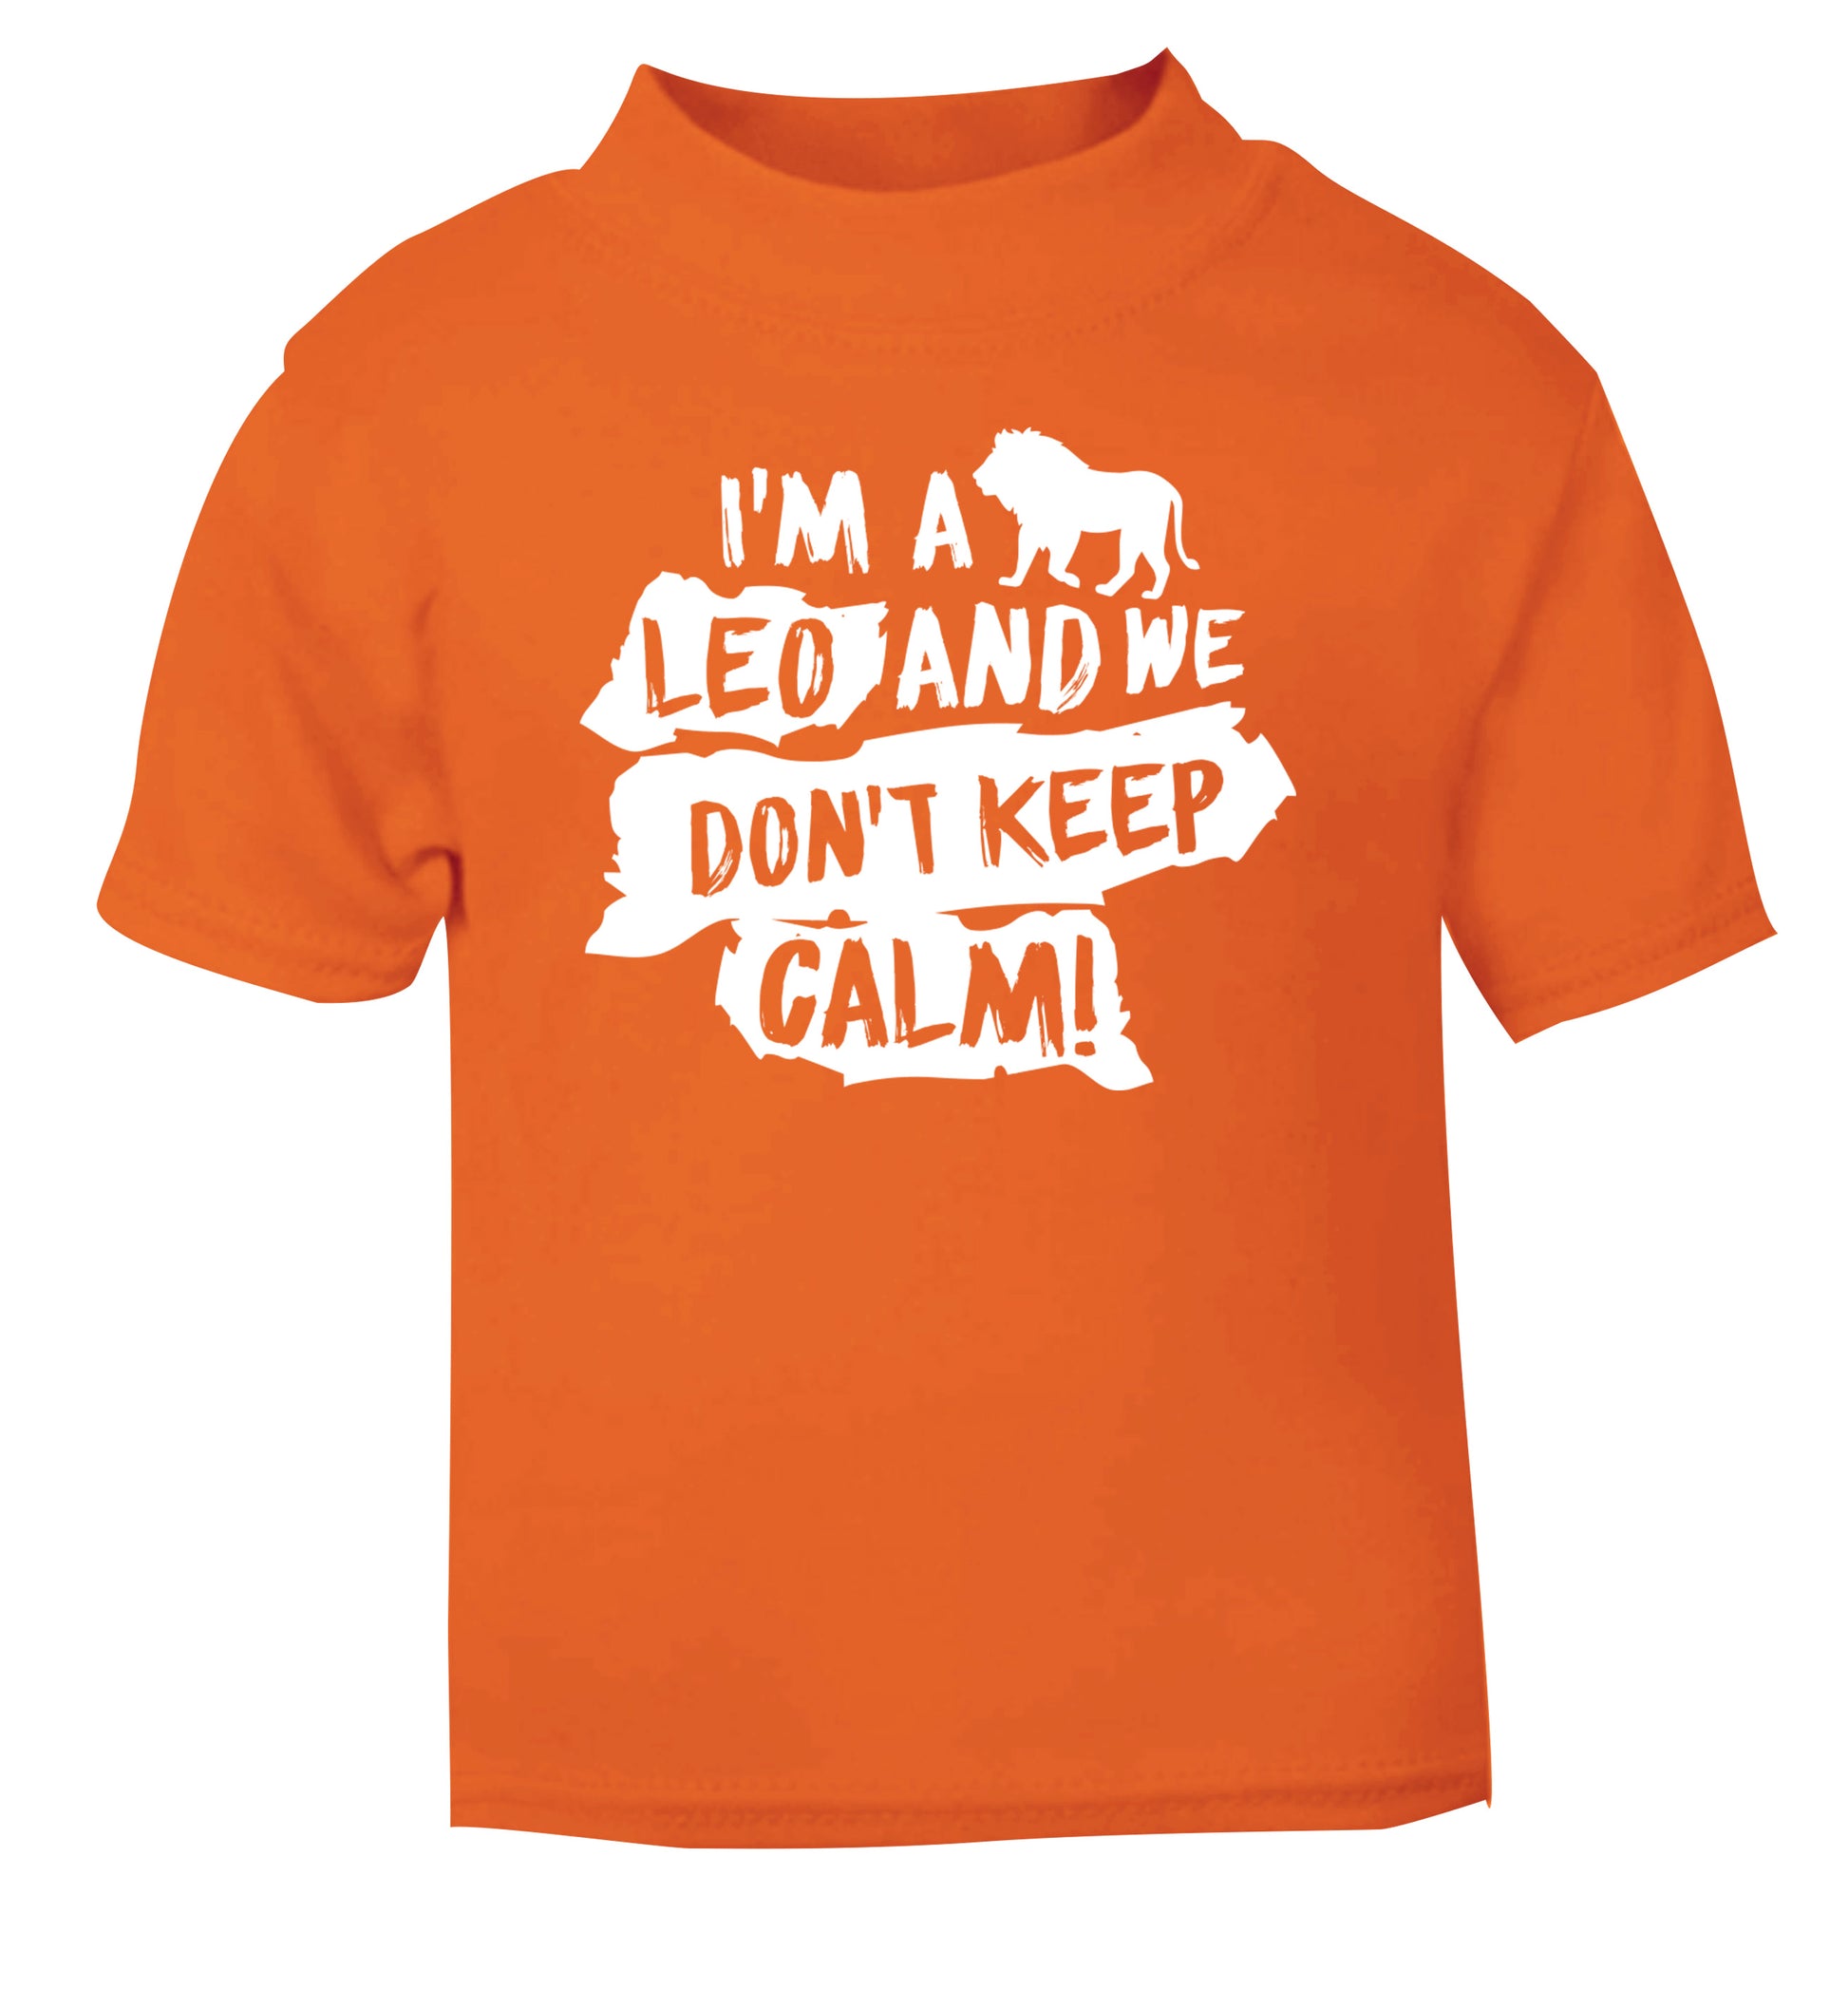 I'm a leo and we don't keep calm! orange Baby Toddler Tshirt 2 Years